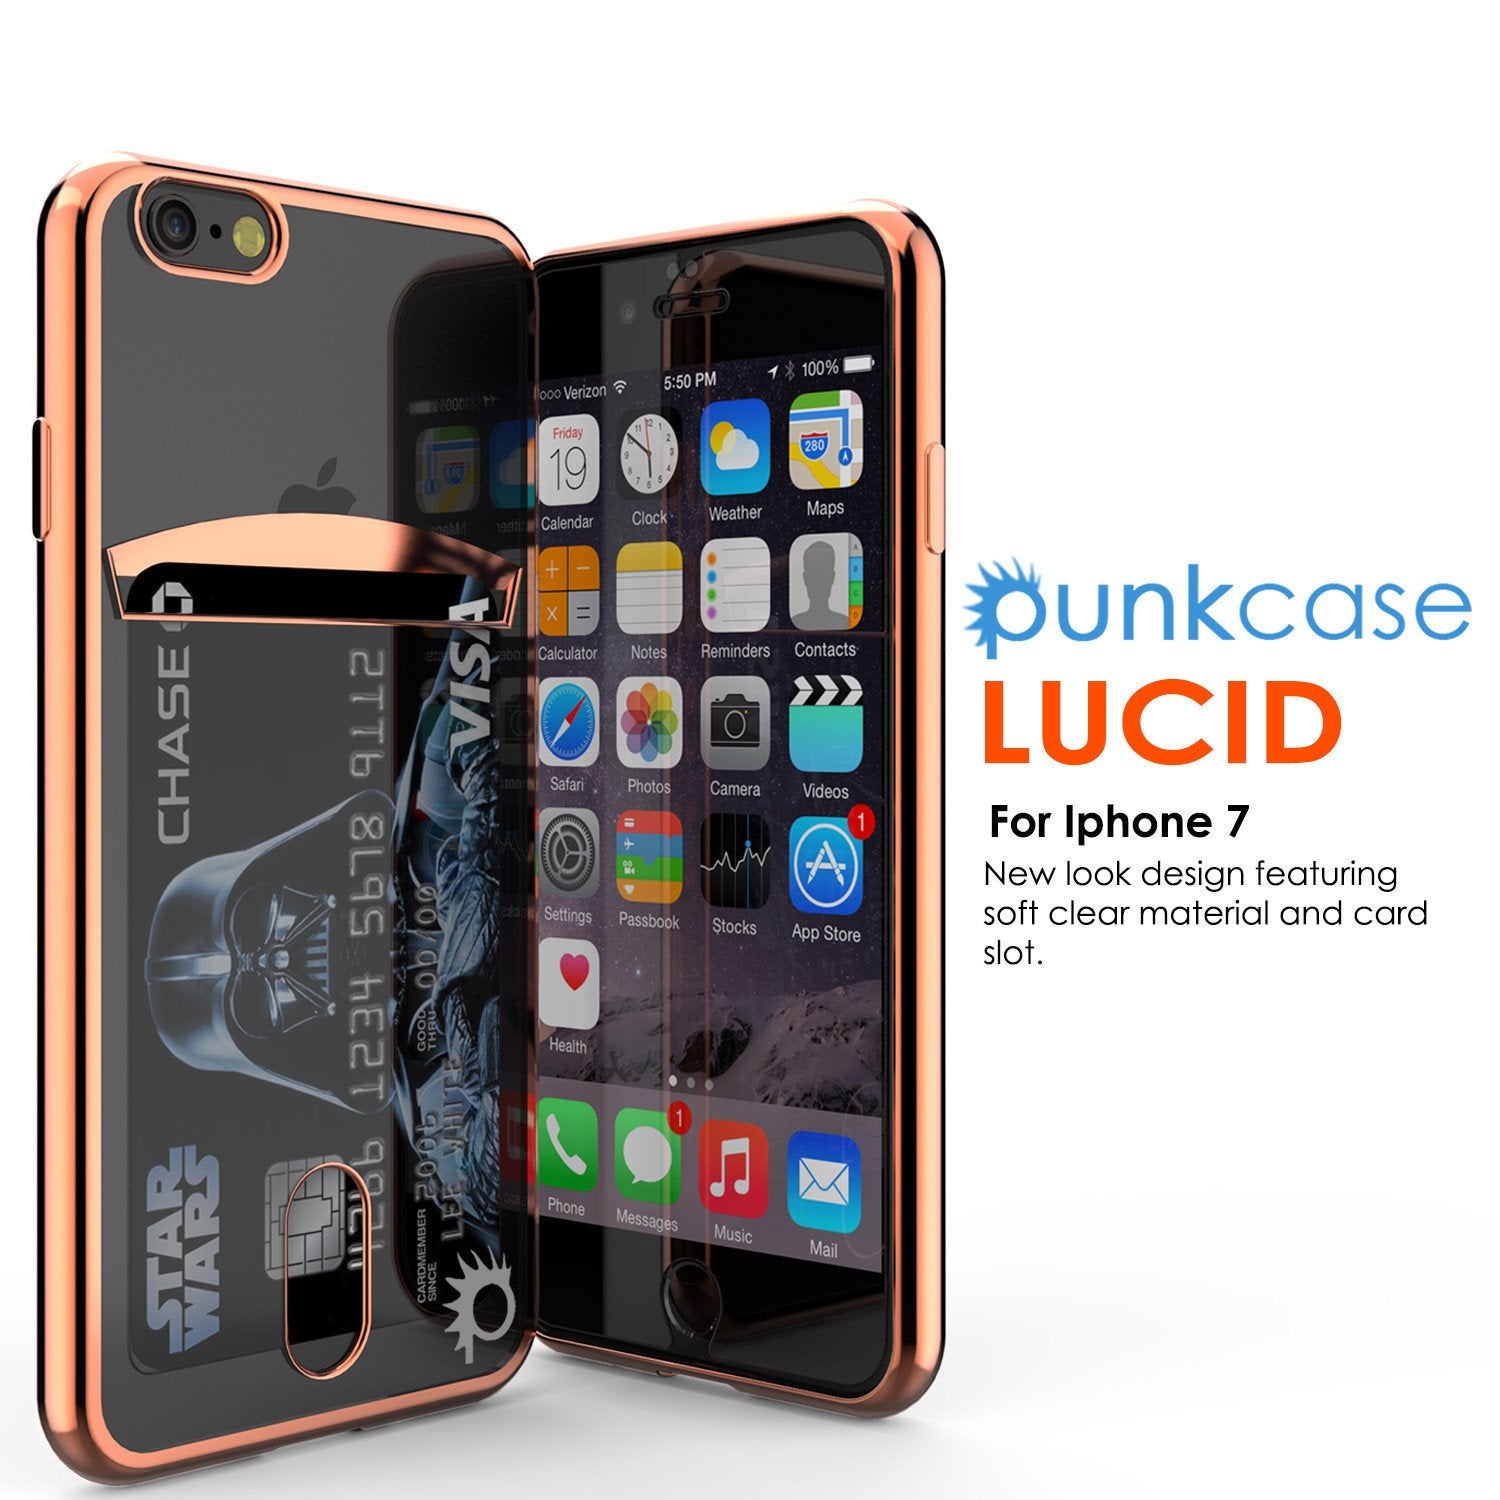 iPhone 7+ Plus Case, PUNKCASE® LUCID Rose Gold Series for iPhone 7+ Plus Premium Impact Protective Armor Case Cover | Clear TPU | Lifetime Warranty Exchange | PUNK SHIELD Screen Protector | Ultra Fit